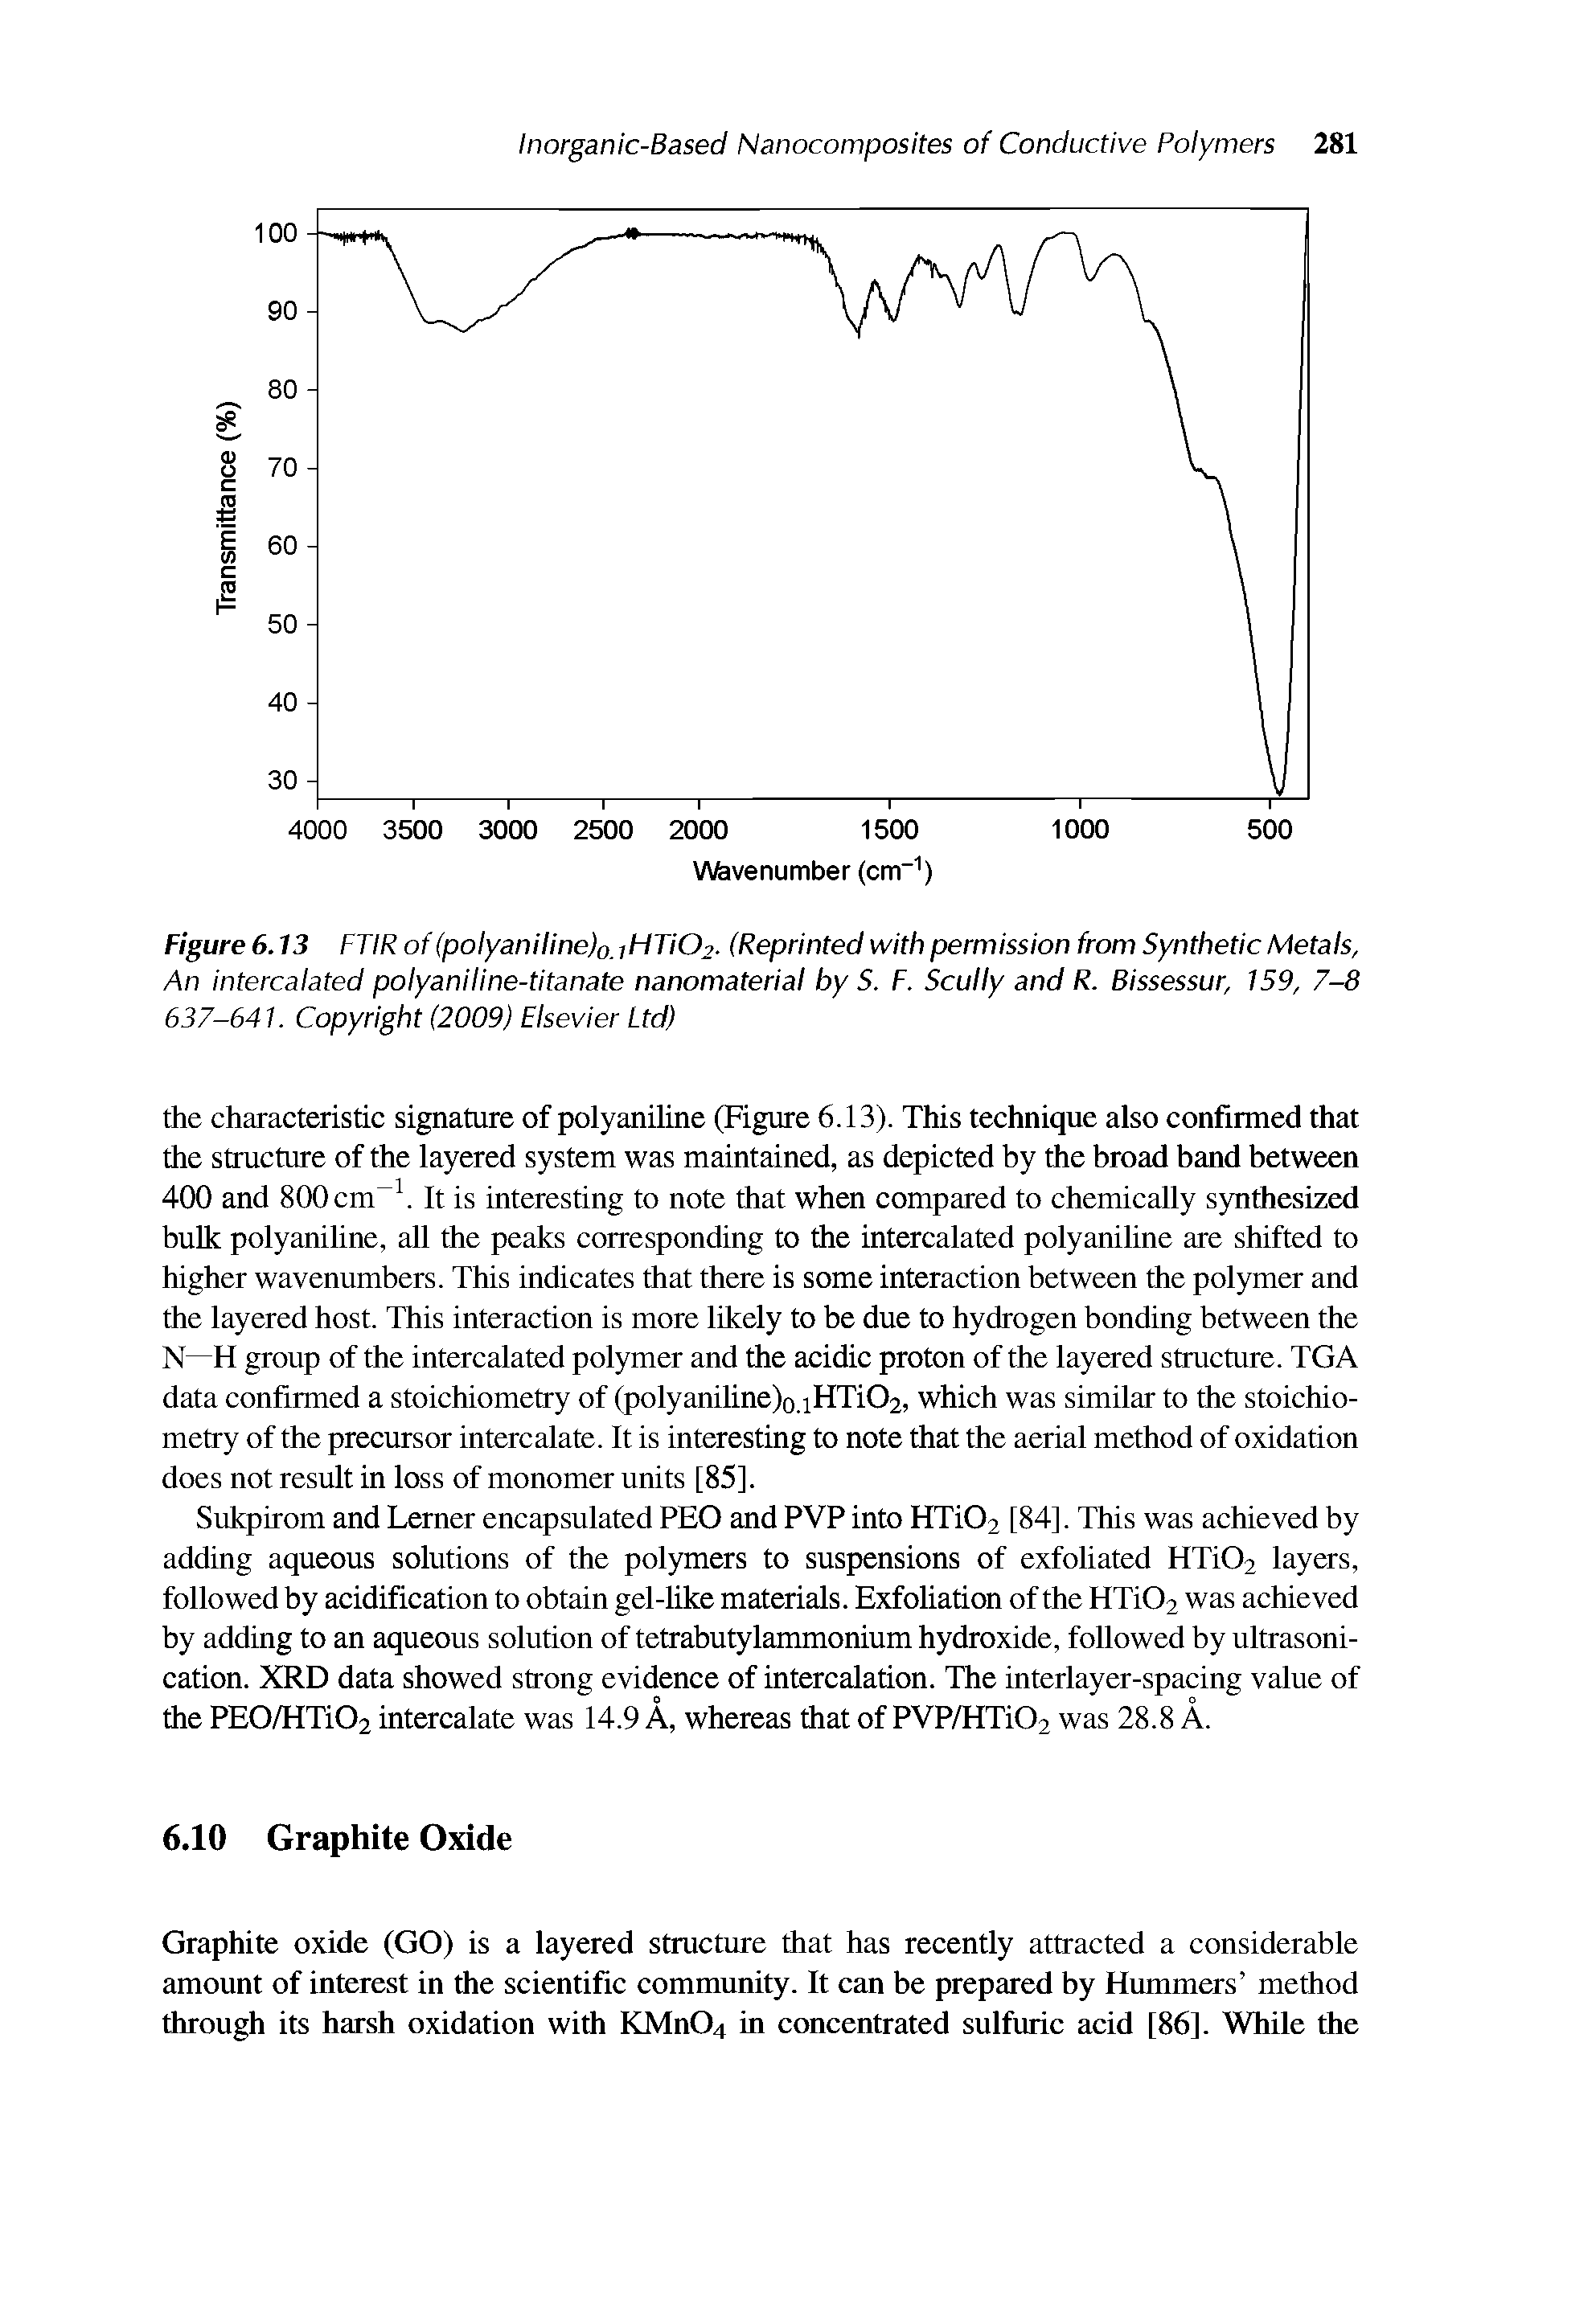 Figure 6.13 FTIR of(polyaniline)o JHT1O2. (Reprinted with permission from Synthetic Metals, An intercalated polyaniline-titanate nanomaterial by 5. F. Scully and R. Bissessur, 159, 7-8 637-641. Copyright (2009) Elsevier Ltd)...